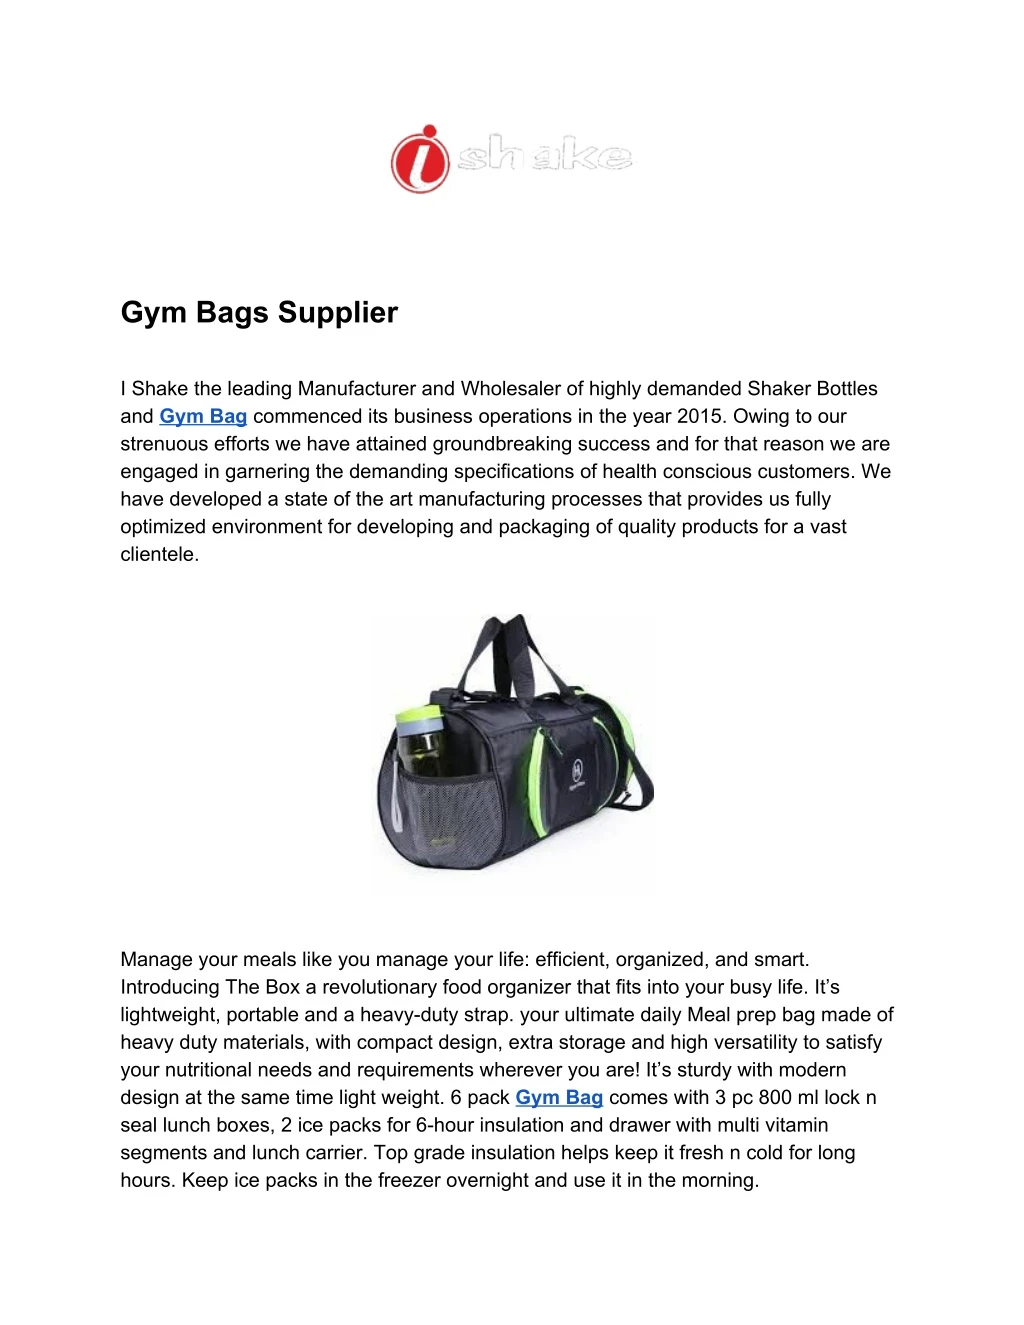 gym bags supplier i shake the leading